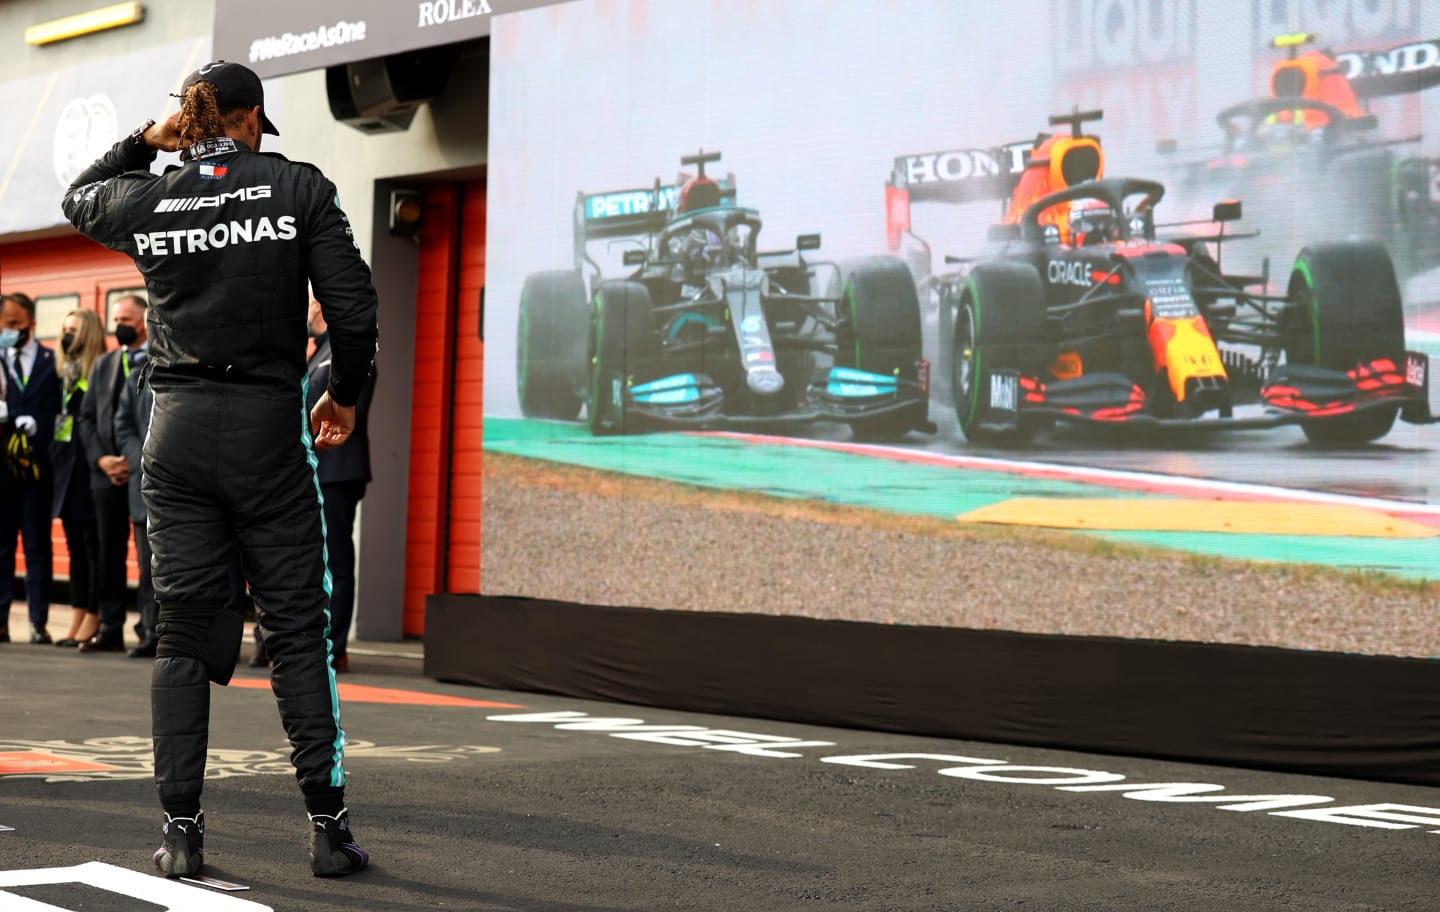 IMOLA, ITALY - APRIL 18: Second placed Lewis Hamilton of Great Britain and Mercedes GP watches a